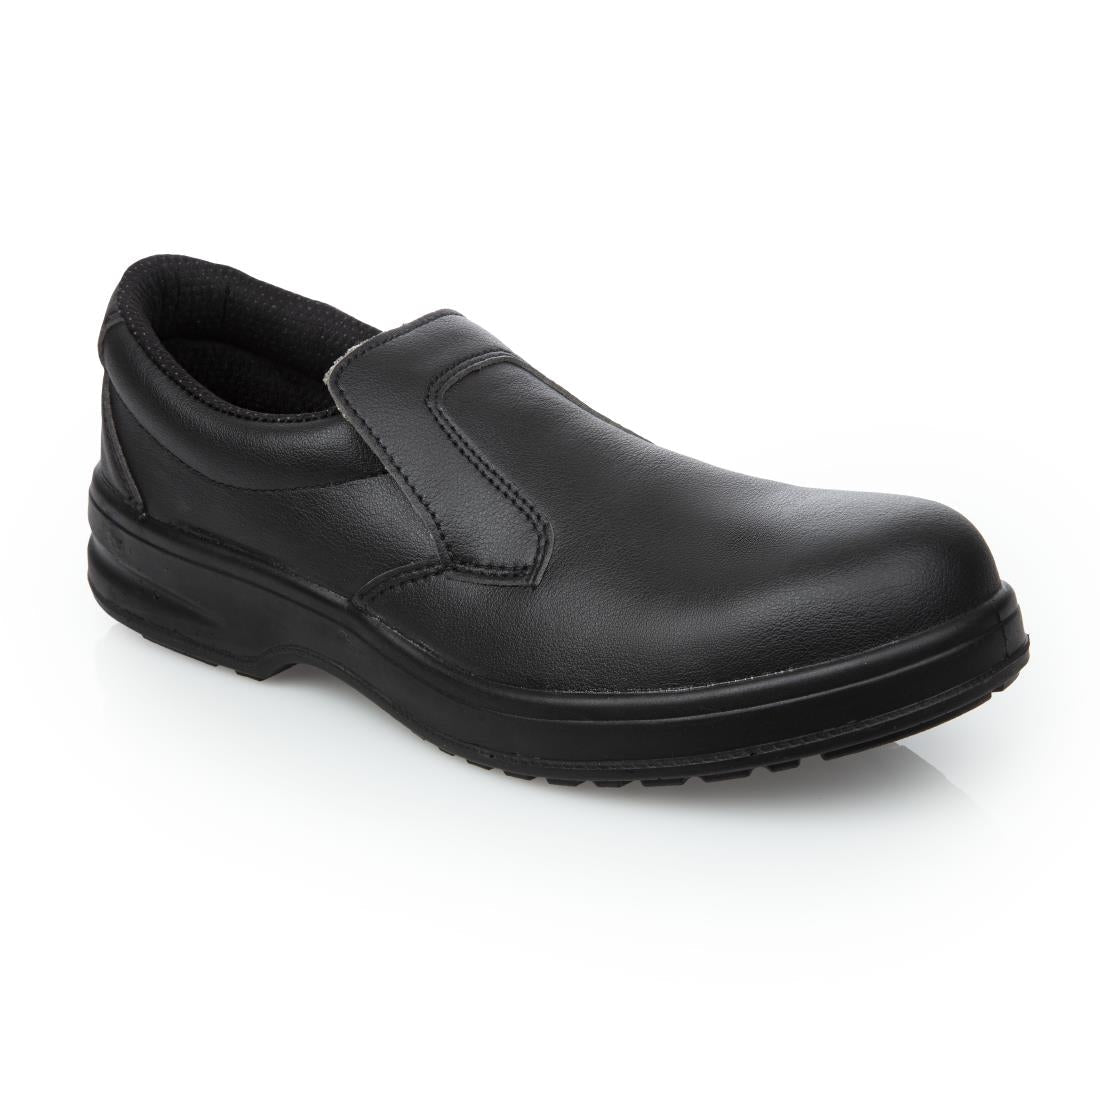 A845-39 Slipbuster Lite Slip On Safety Shoes Black 39 JD Catering Equipment Solutions Ltd